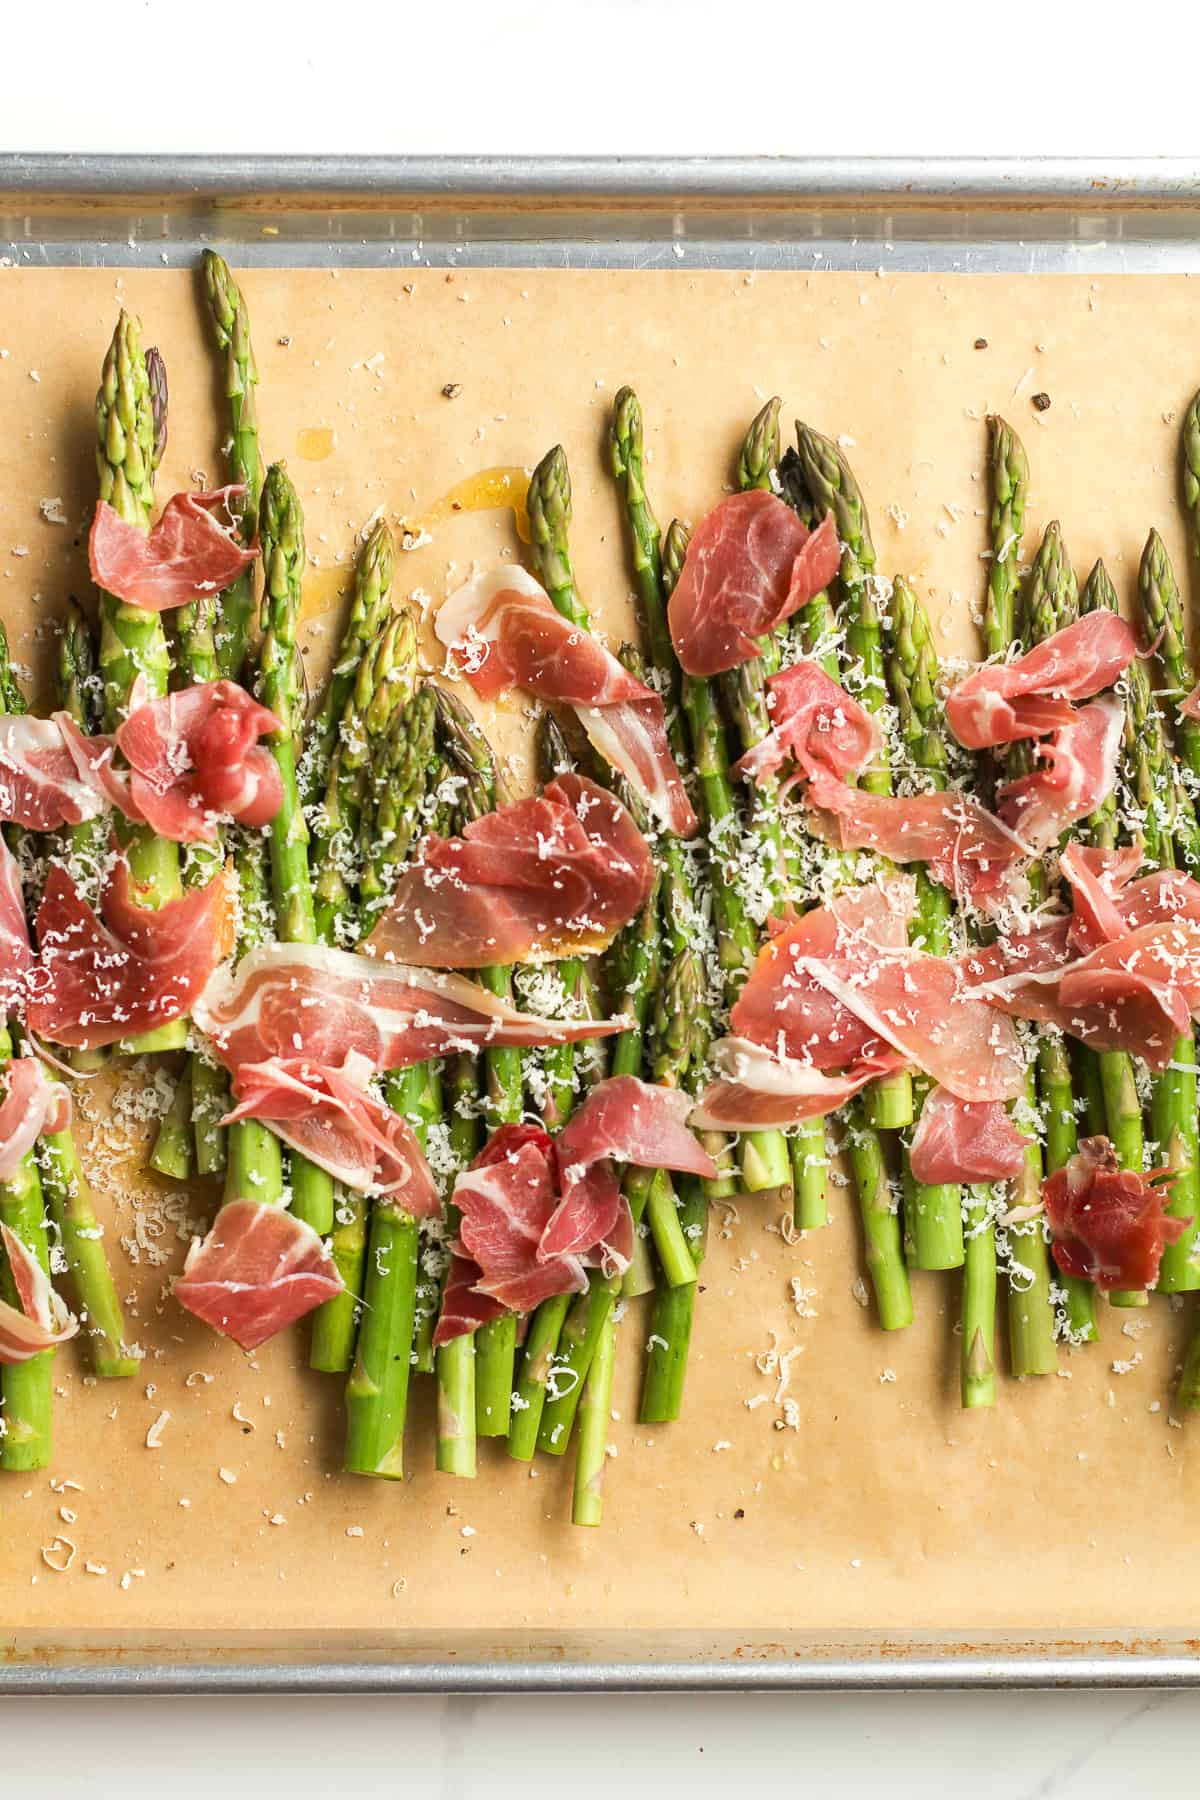 The asparagus plus toppings on a sheet pan.